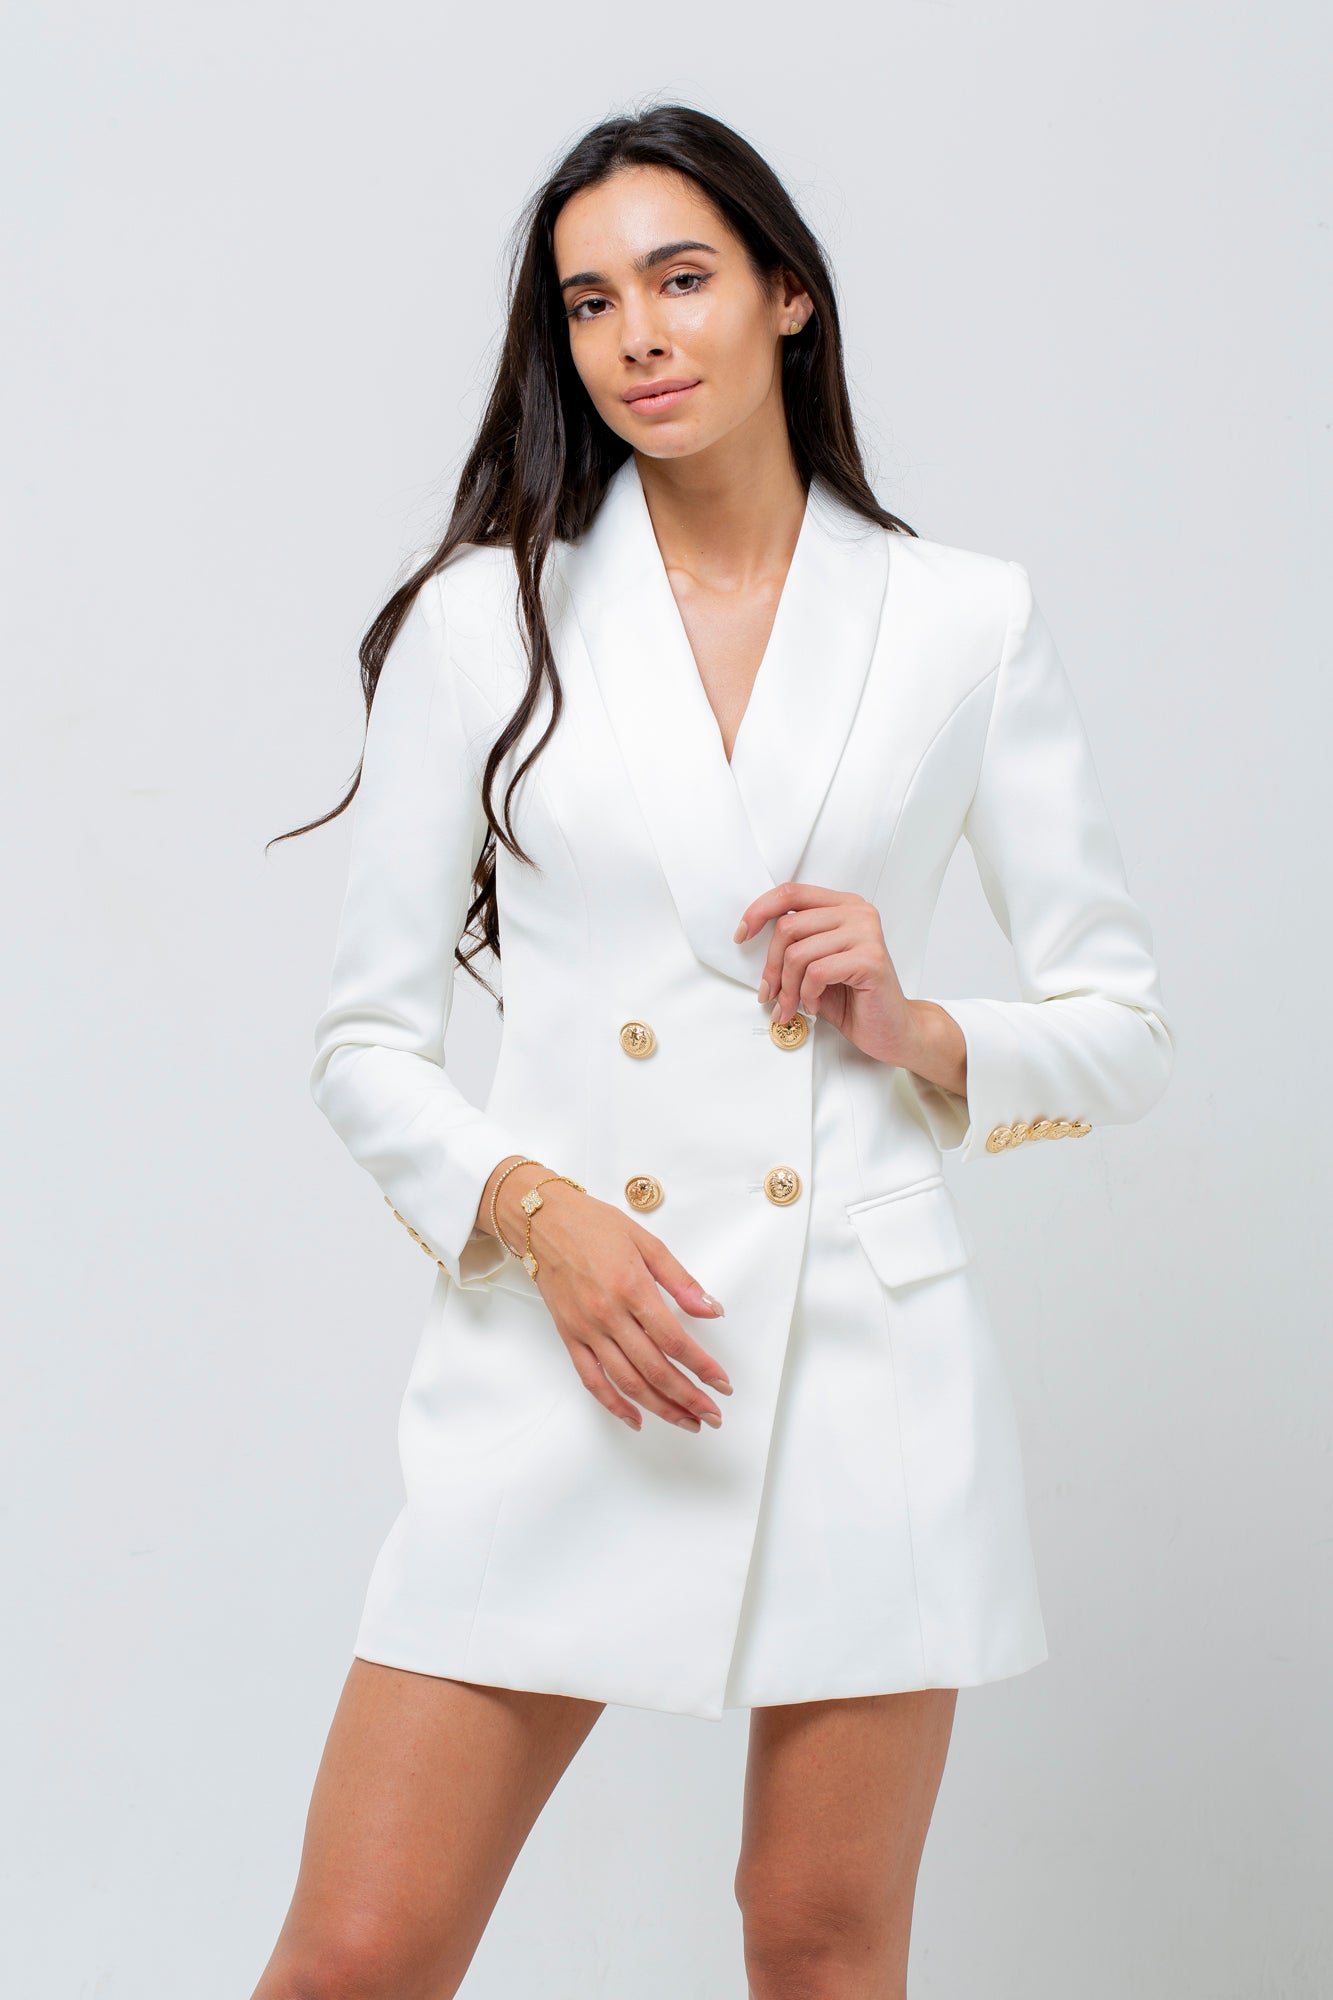 WHITE DRESS 4 GOLD BUTTONS